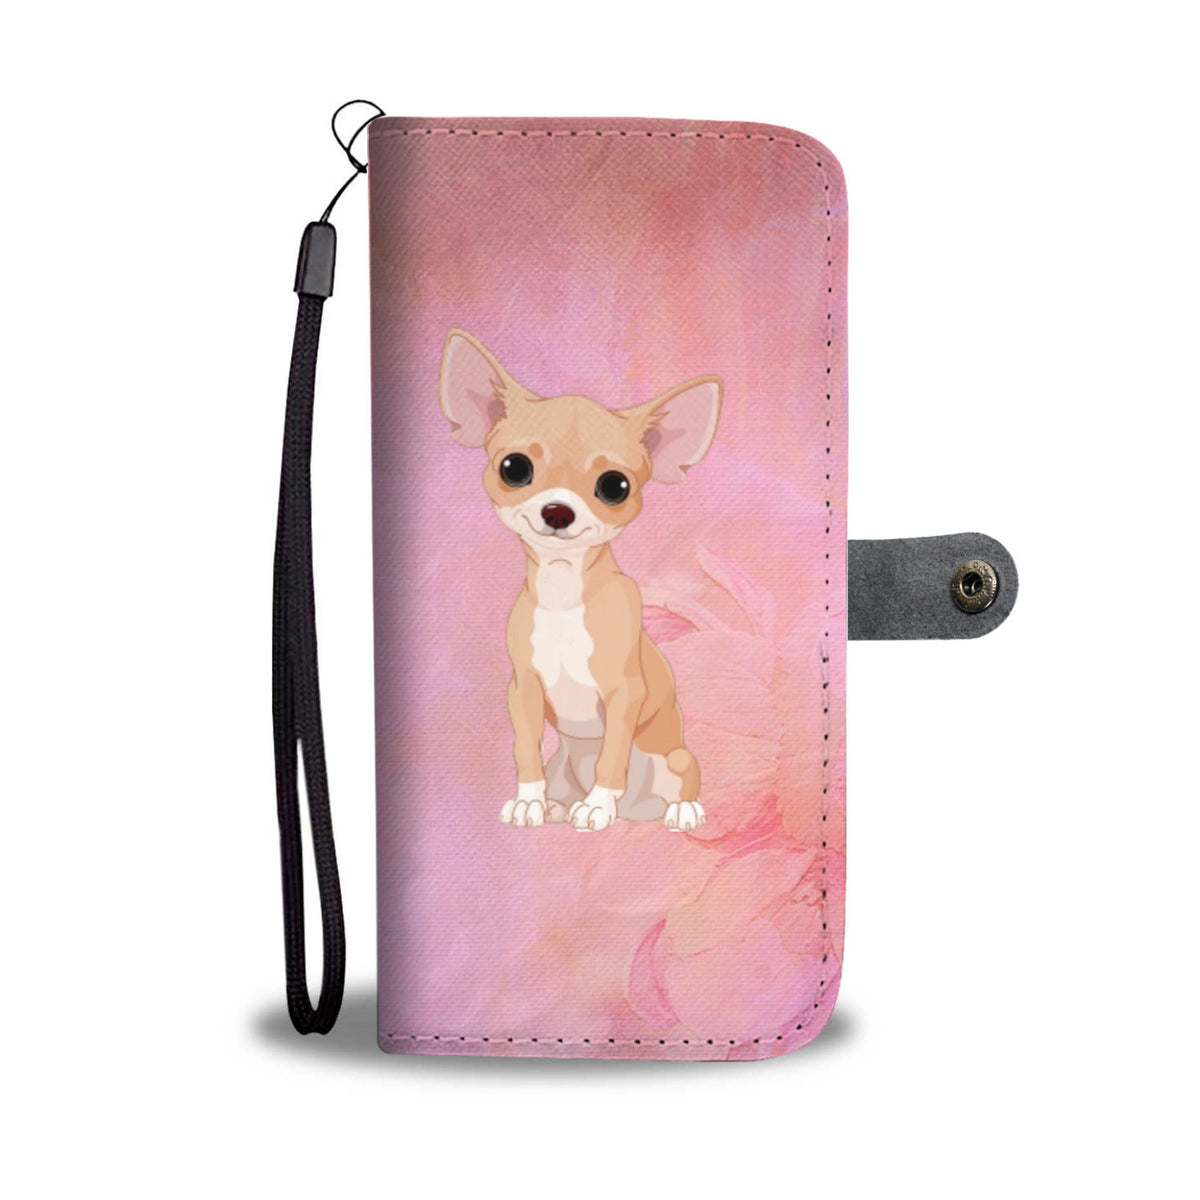 Chihuahua Phone Case Wallet - Pink Floral